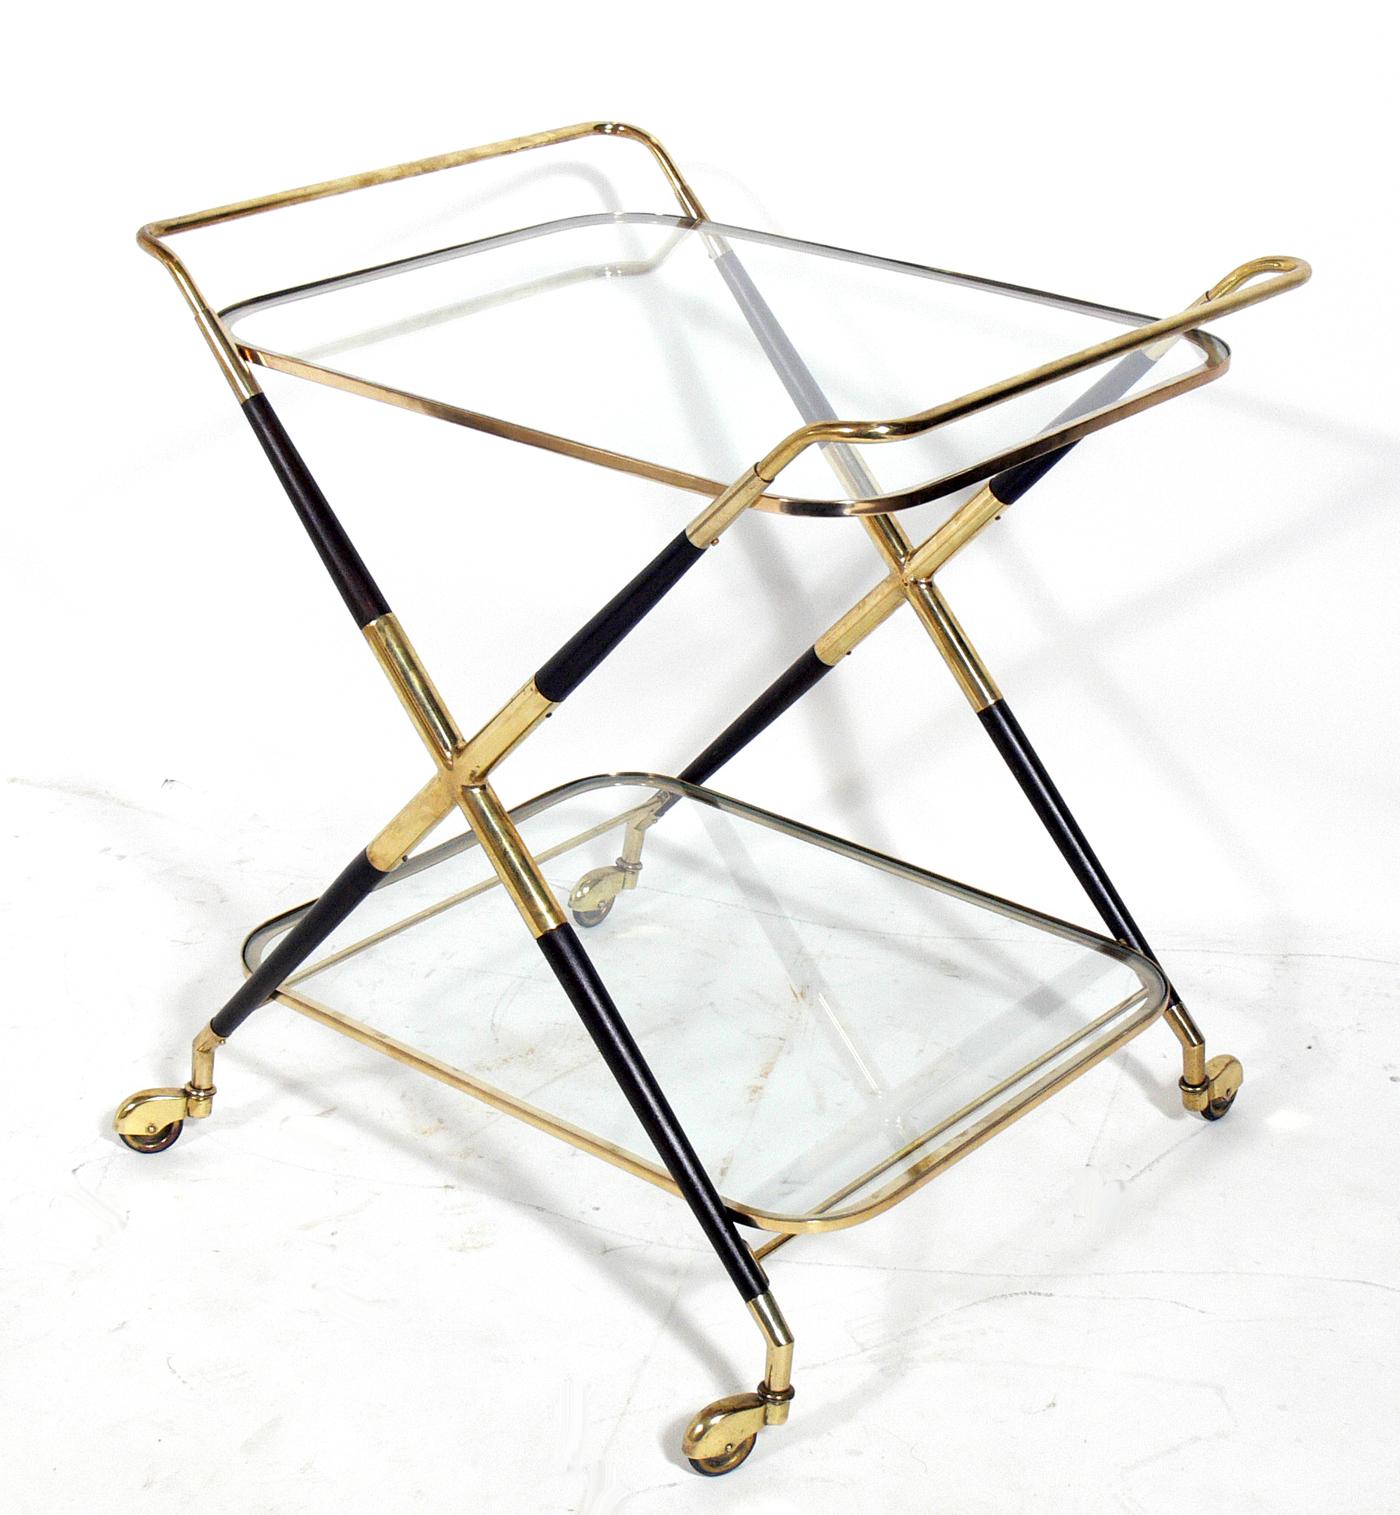 Sculptural Italian bar cart, designed by Cesare Lacca, Italy, circa 1950s. This example has been completely restored, with the wood being refinished in an ultra-deep brown lacquer, the brass being hand polished and lacquered, and the glass replaced.